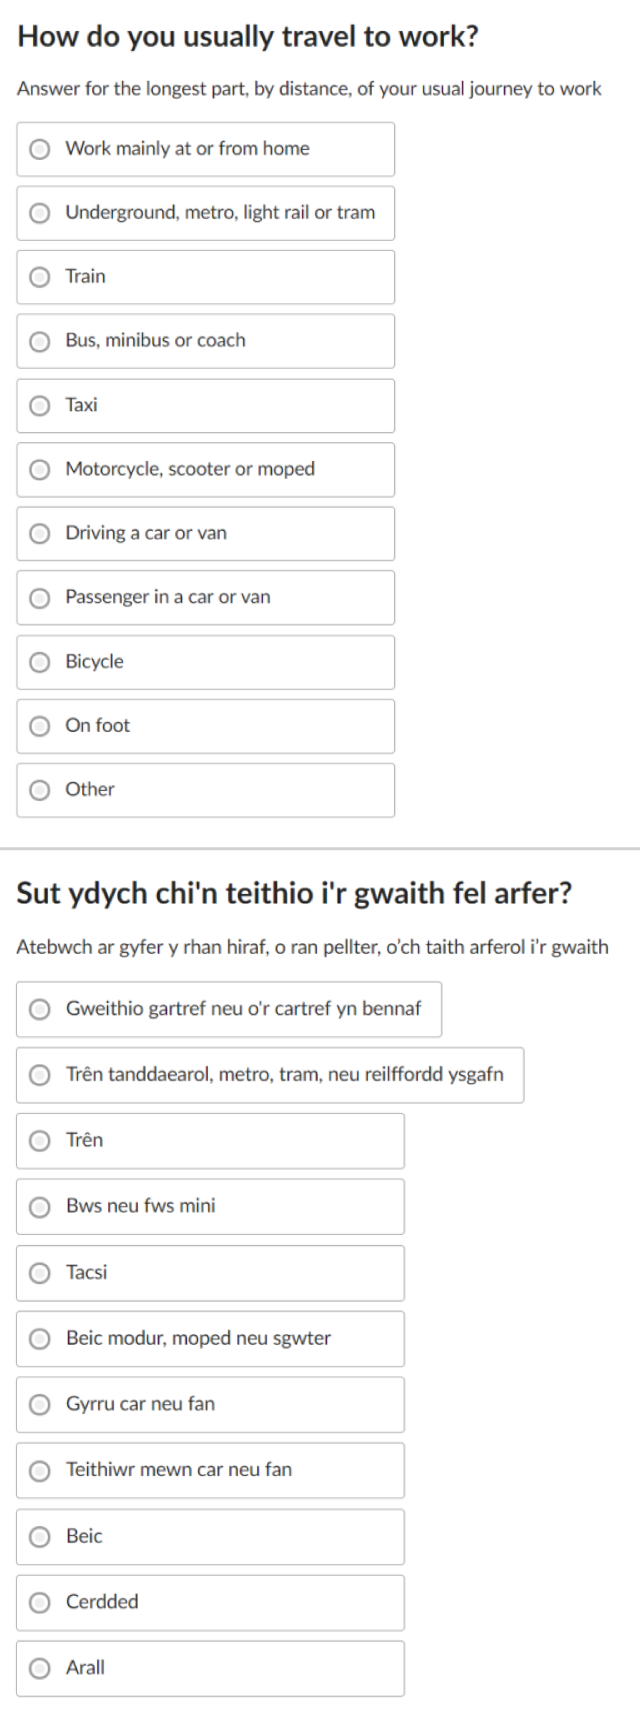 In Online question on travel to work, asked if aged 16 years or over, in English and Welsh.